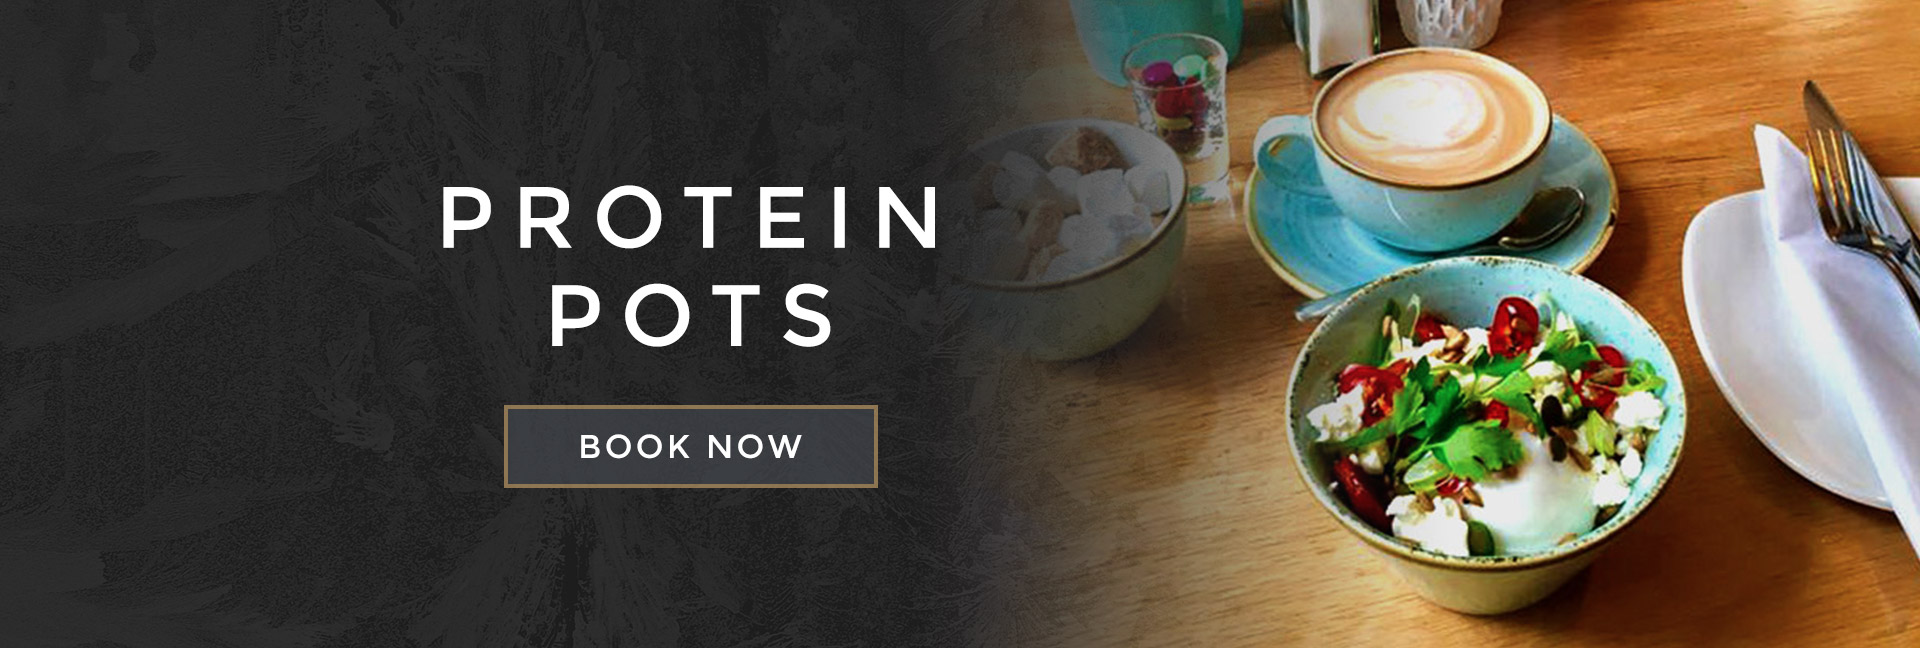 Protein pots at All Bar One Guildford - Book your table